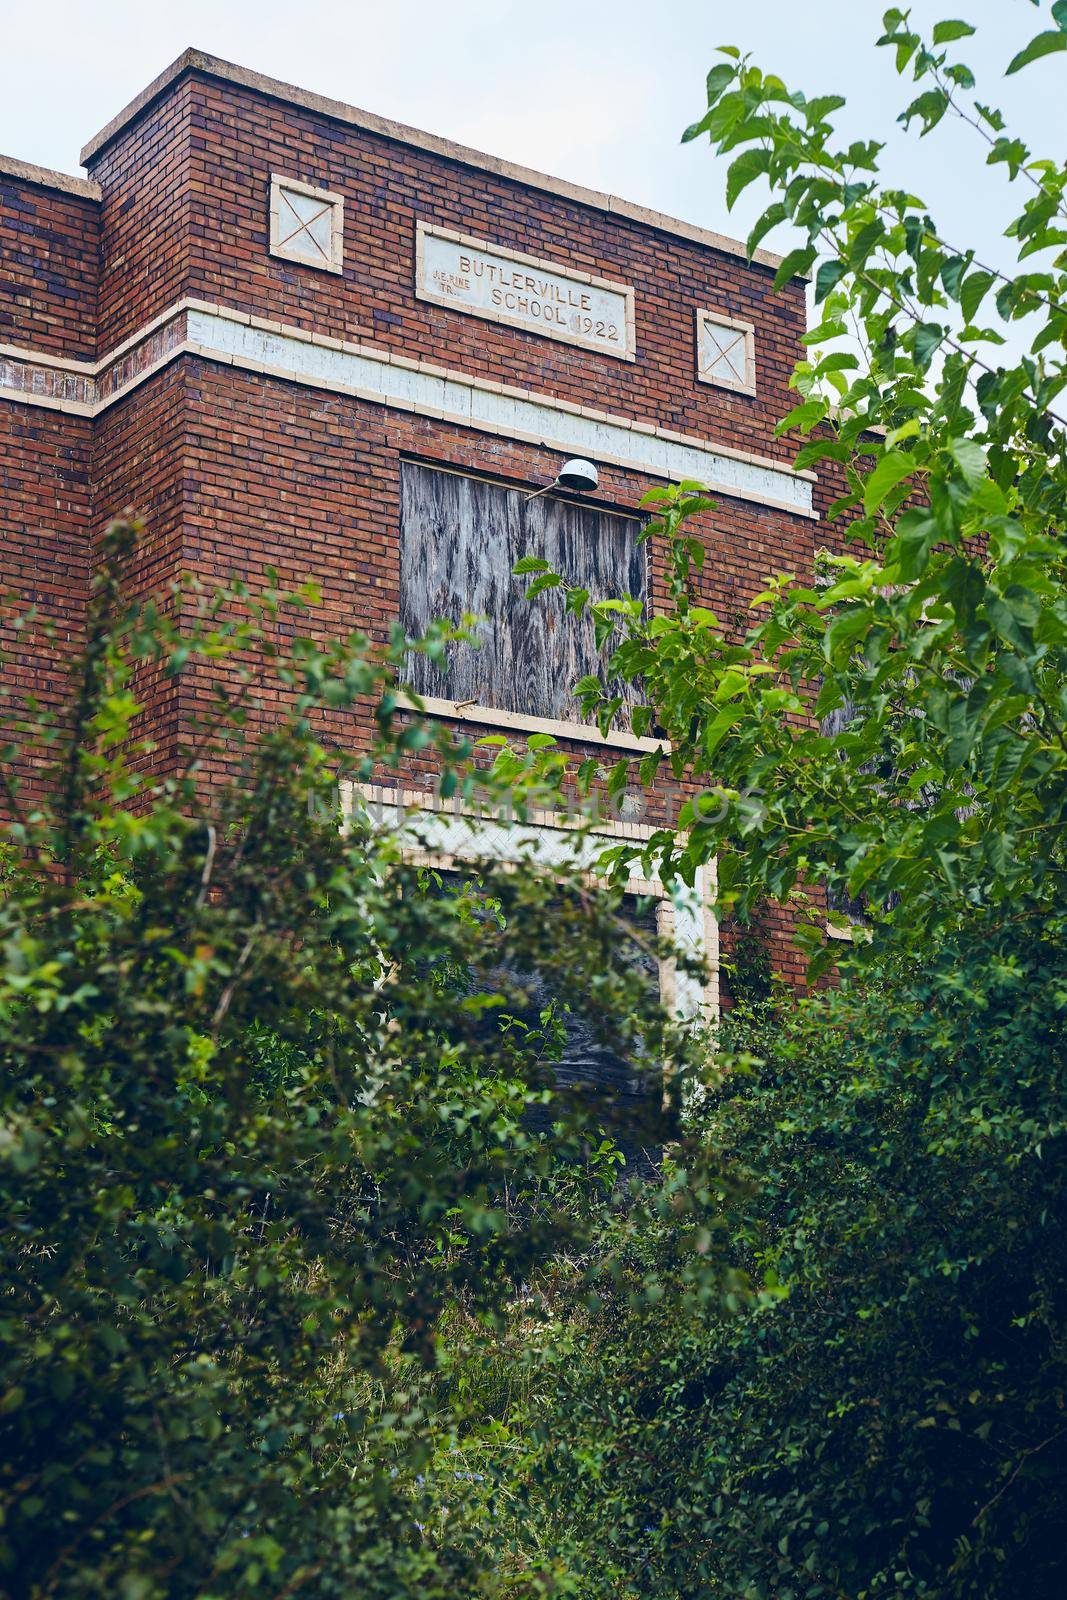 Image of Red brick abandoned high school building surrounded by green bushes